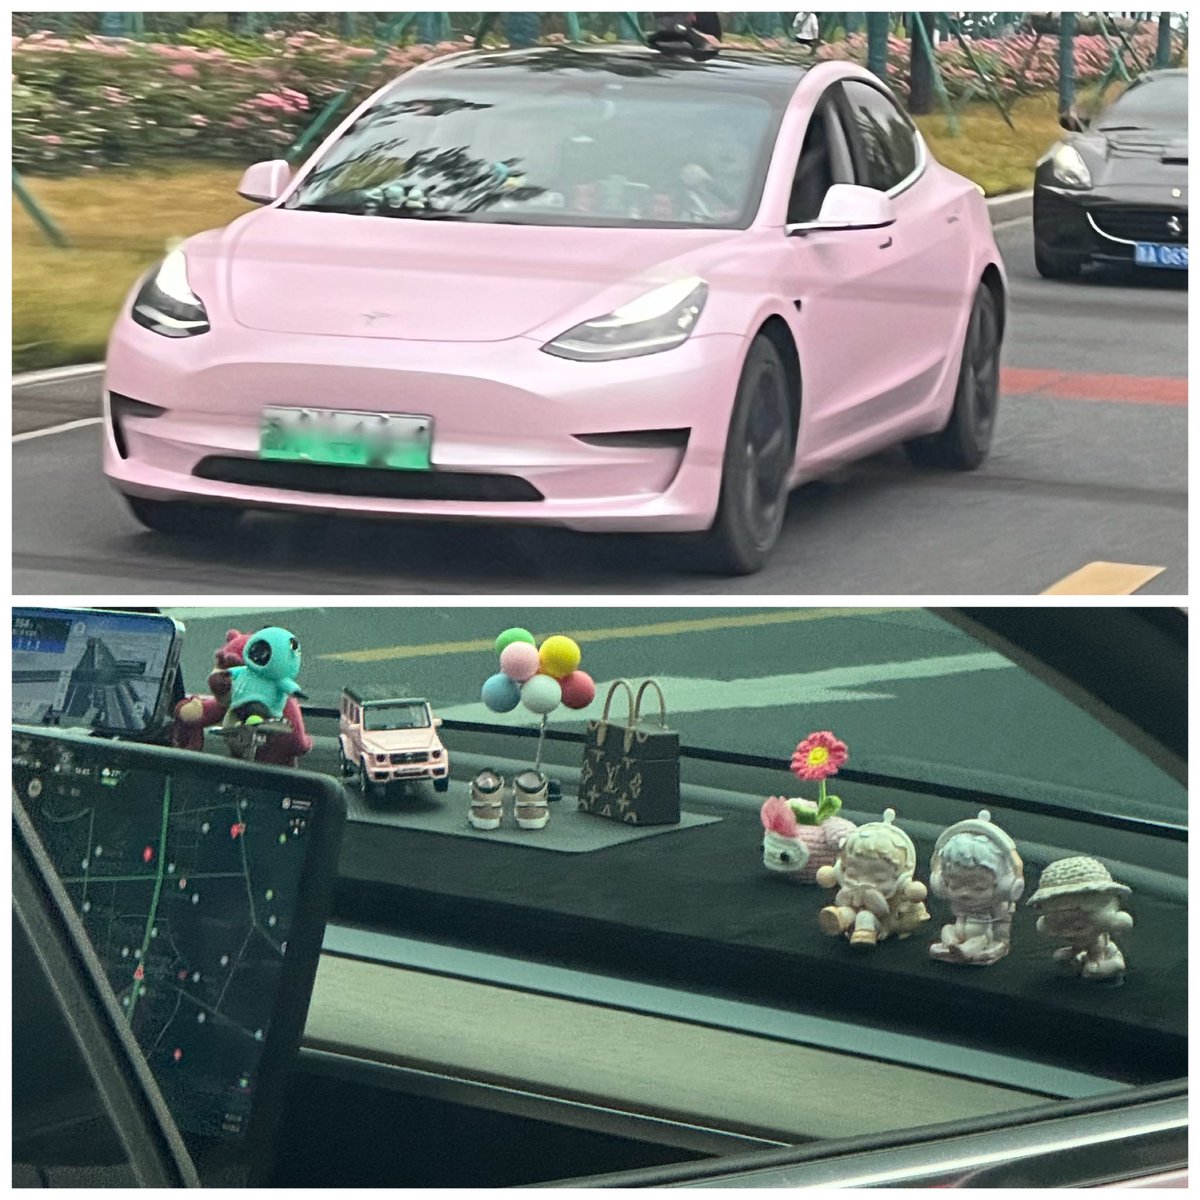 When visiting a city for the first time, I love to have a day of sightseeing. 
Enjoying Hangzhou with my fabulous manager and CAA China agents💖💖💖
We also have fun spotting the Teslas. This one was adorable: it’s pink with wonderful ornaments on the dashboard 💖💖